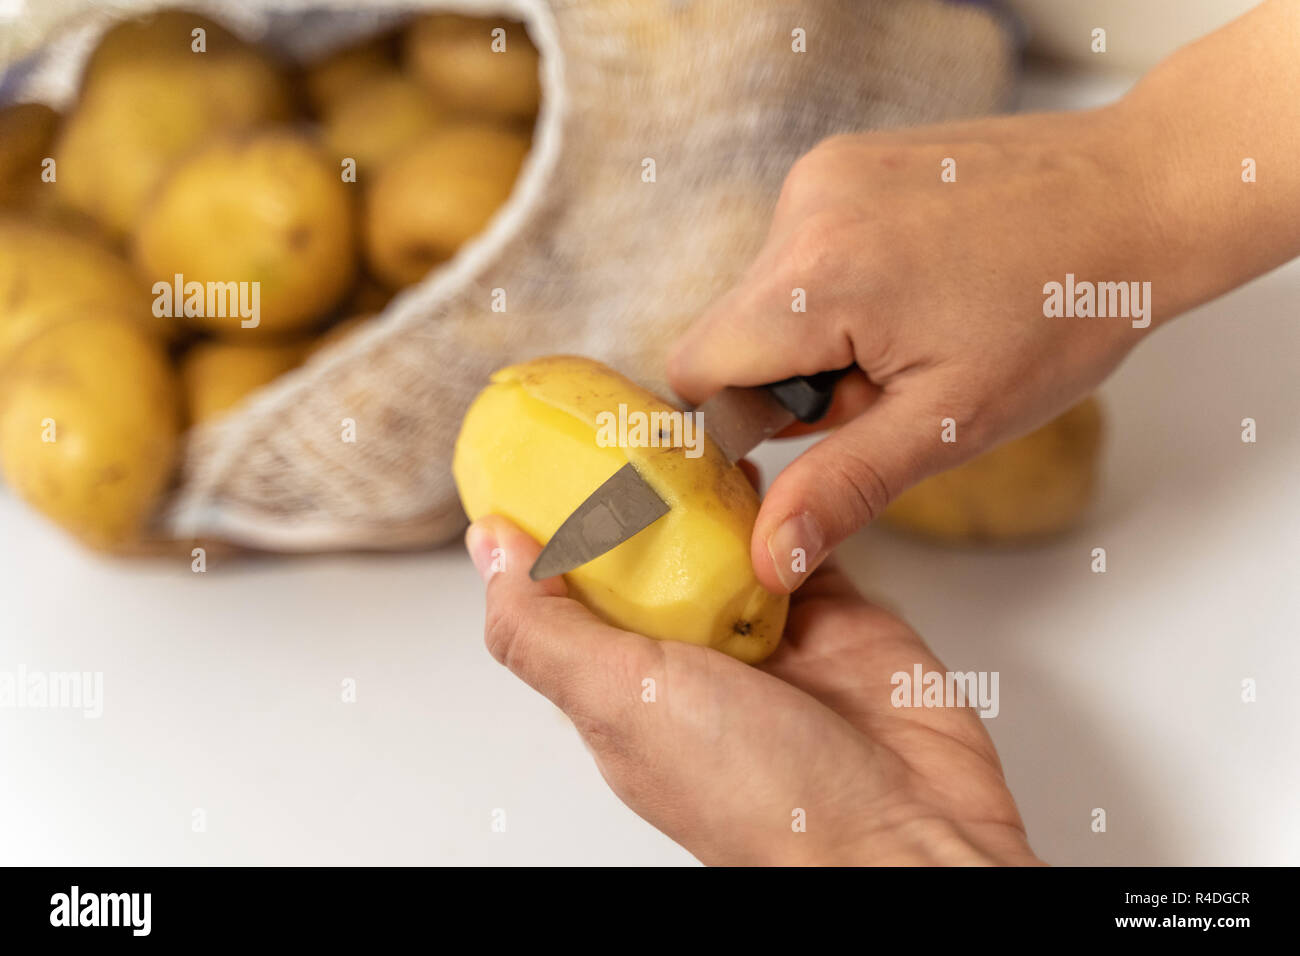 https://c8.alamy.com/comp/R4DGCR/womans-hands-with-small-kitchen-knife-potatoes-peeling-bag-with-unpeeled-potatoes-R4DGCR.jpg